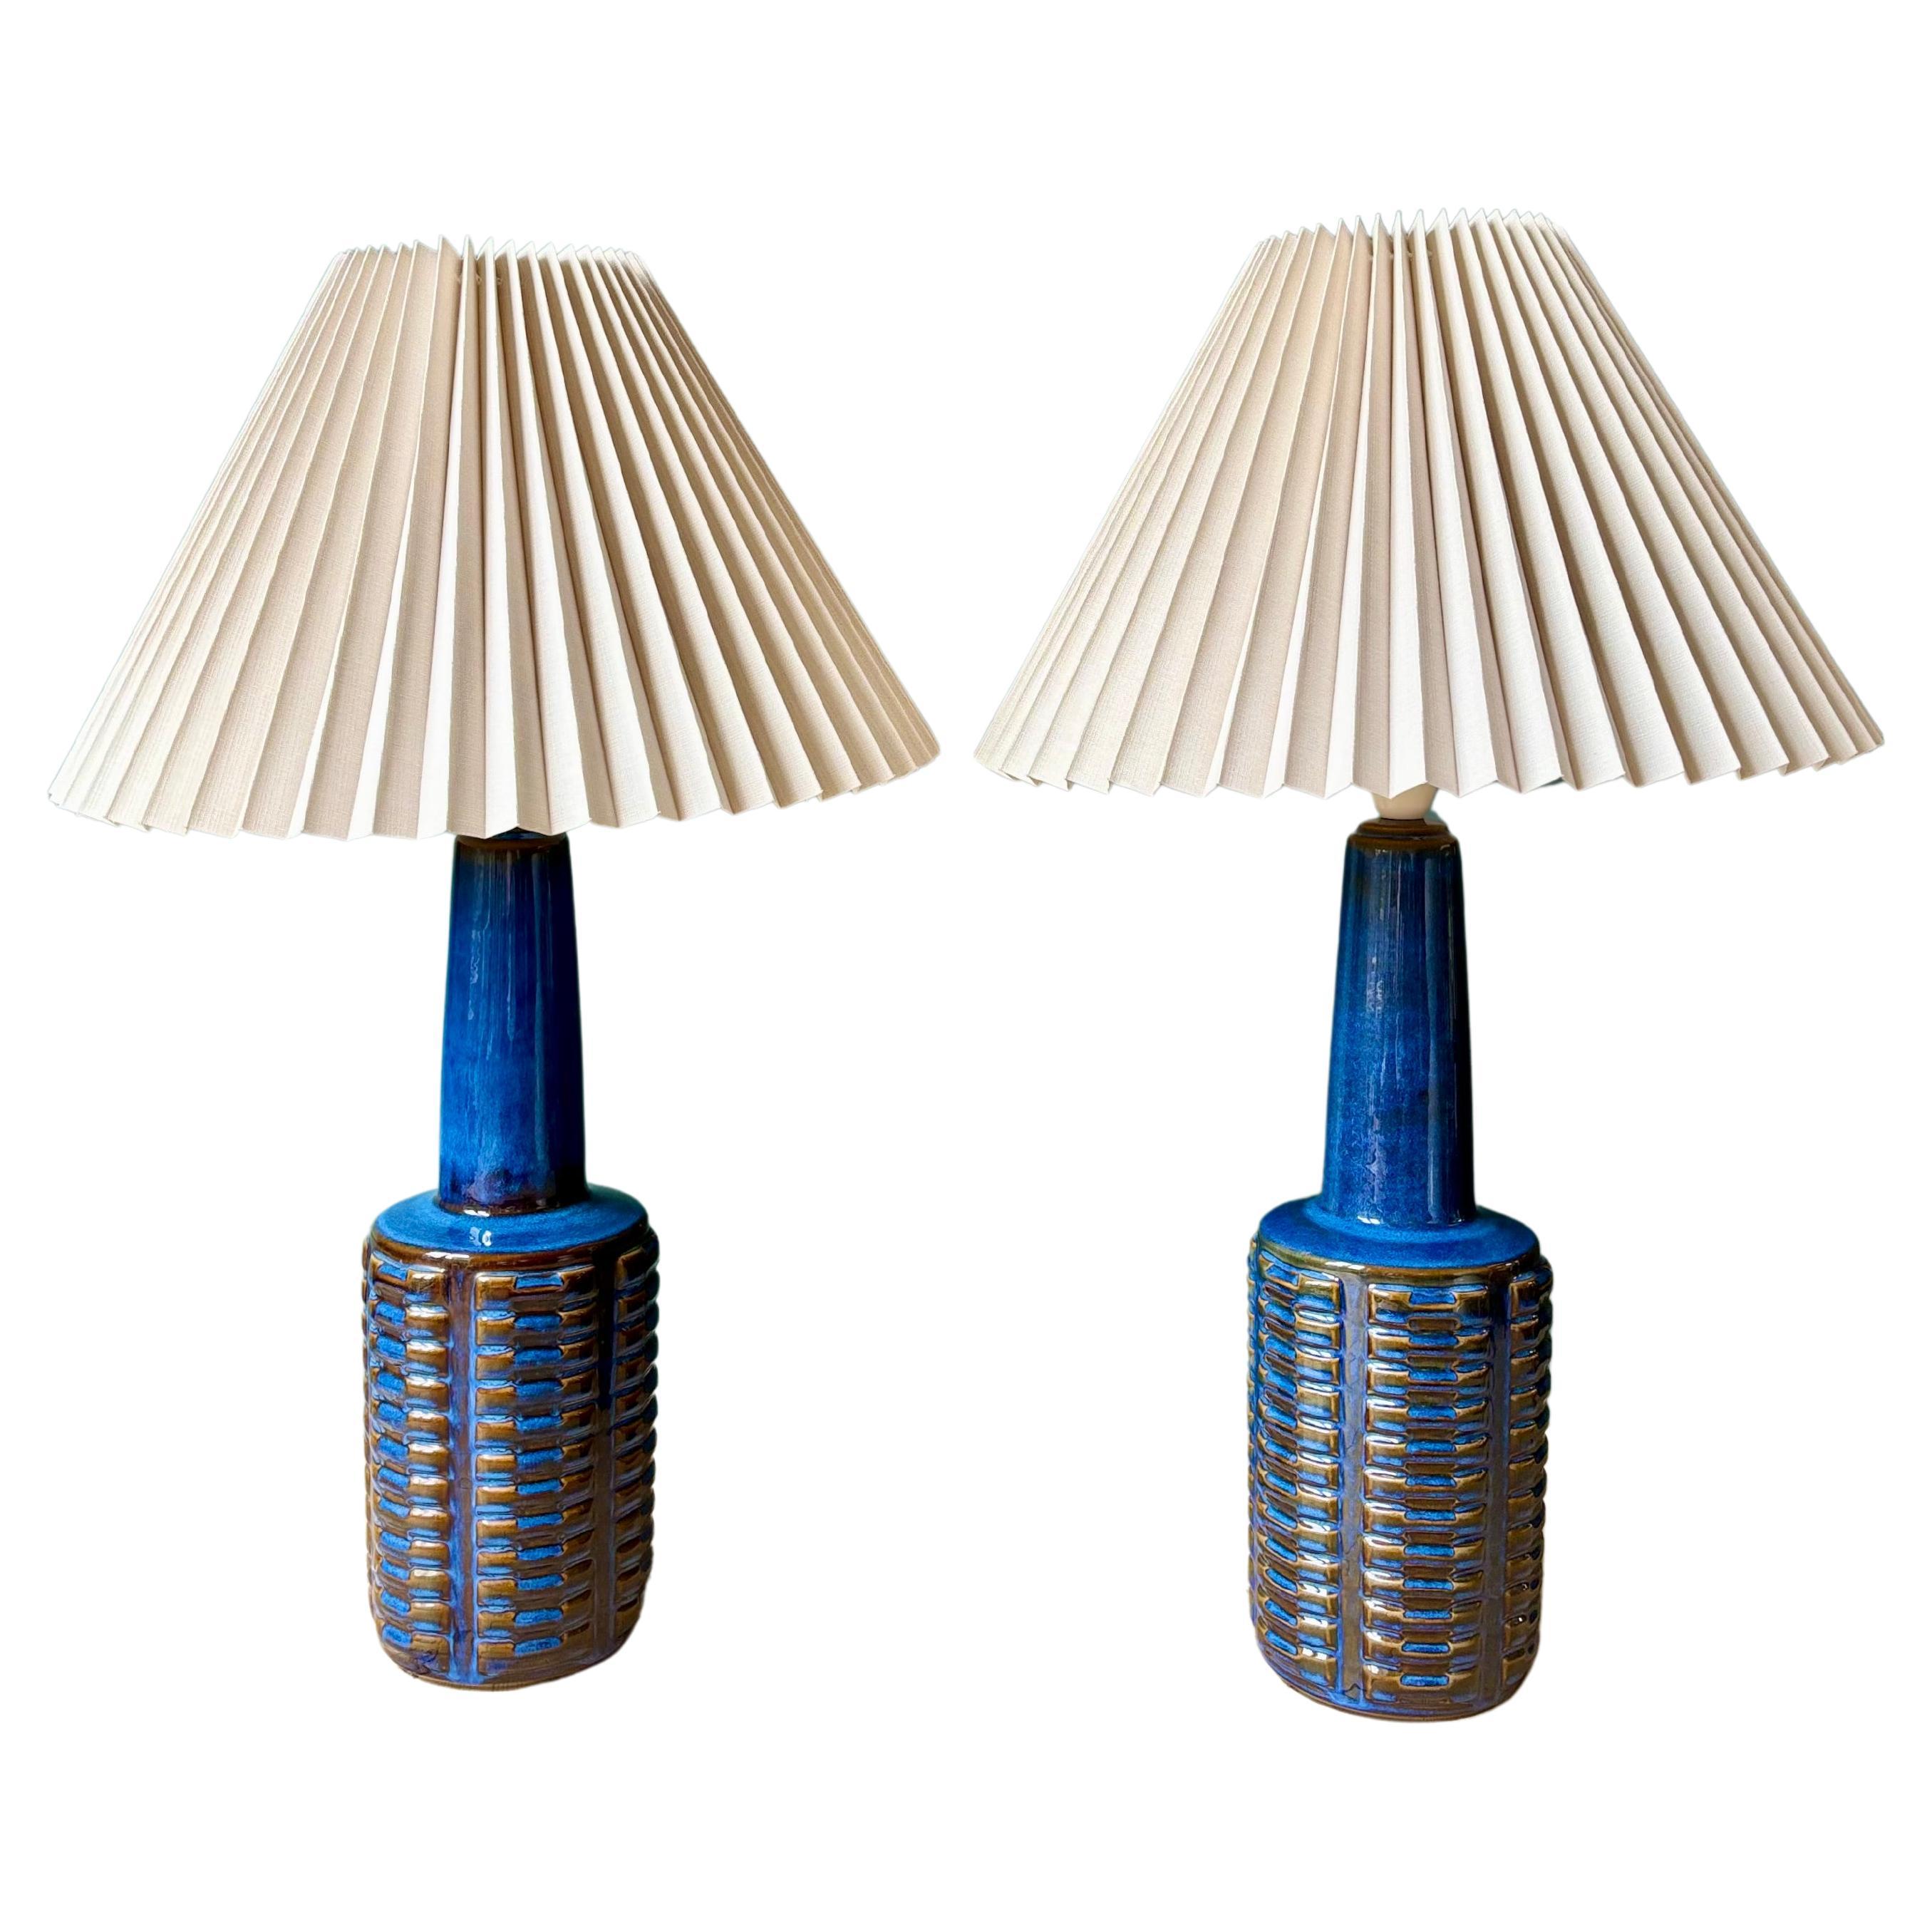 Soholm Pottery Table Lamps